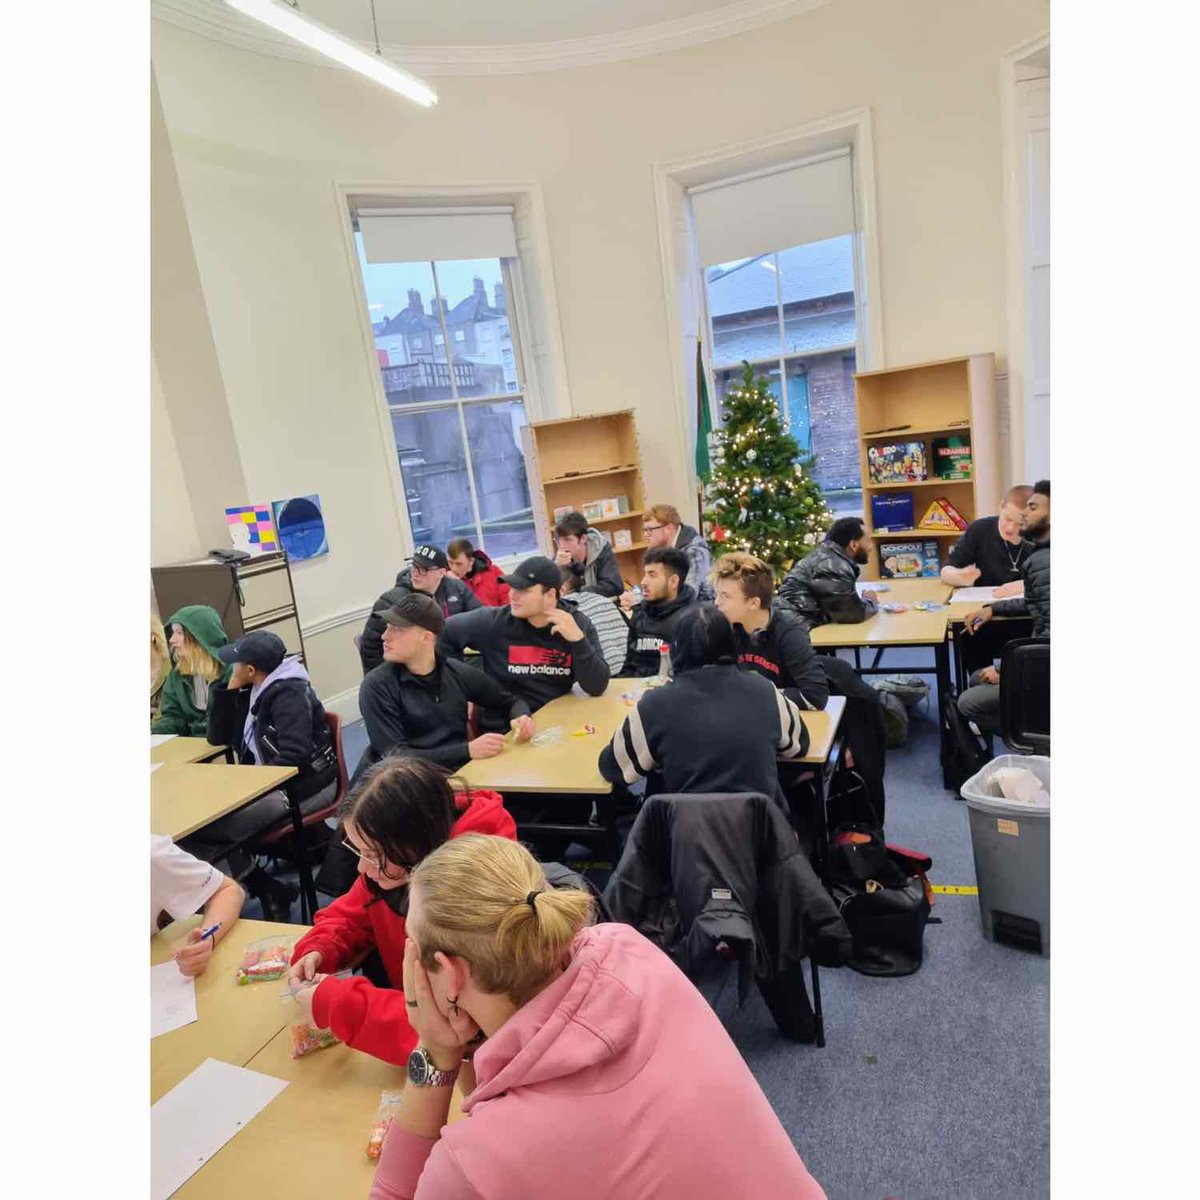 Our Christmas week activities started off today with our annual  student Christmas Quiz. A high standard of quizzing with the winning team scoring 69/77 #youthreach #youthreachtransitioncentre #quiz #quiztime #christmasquiz